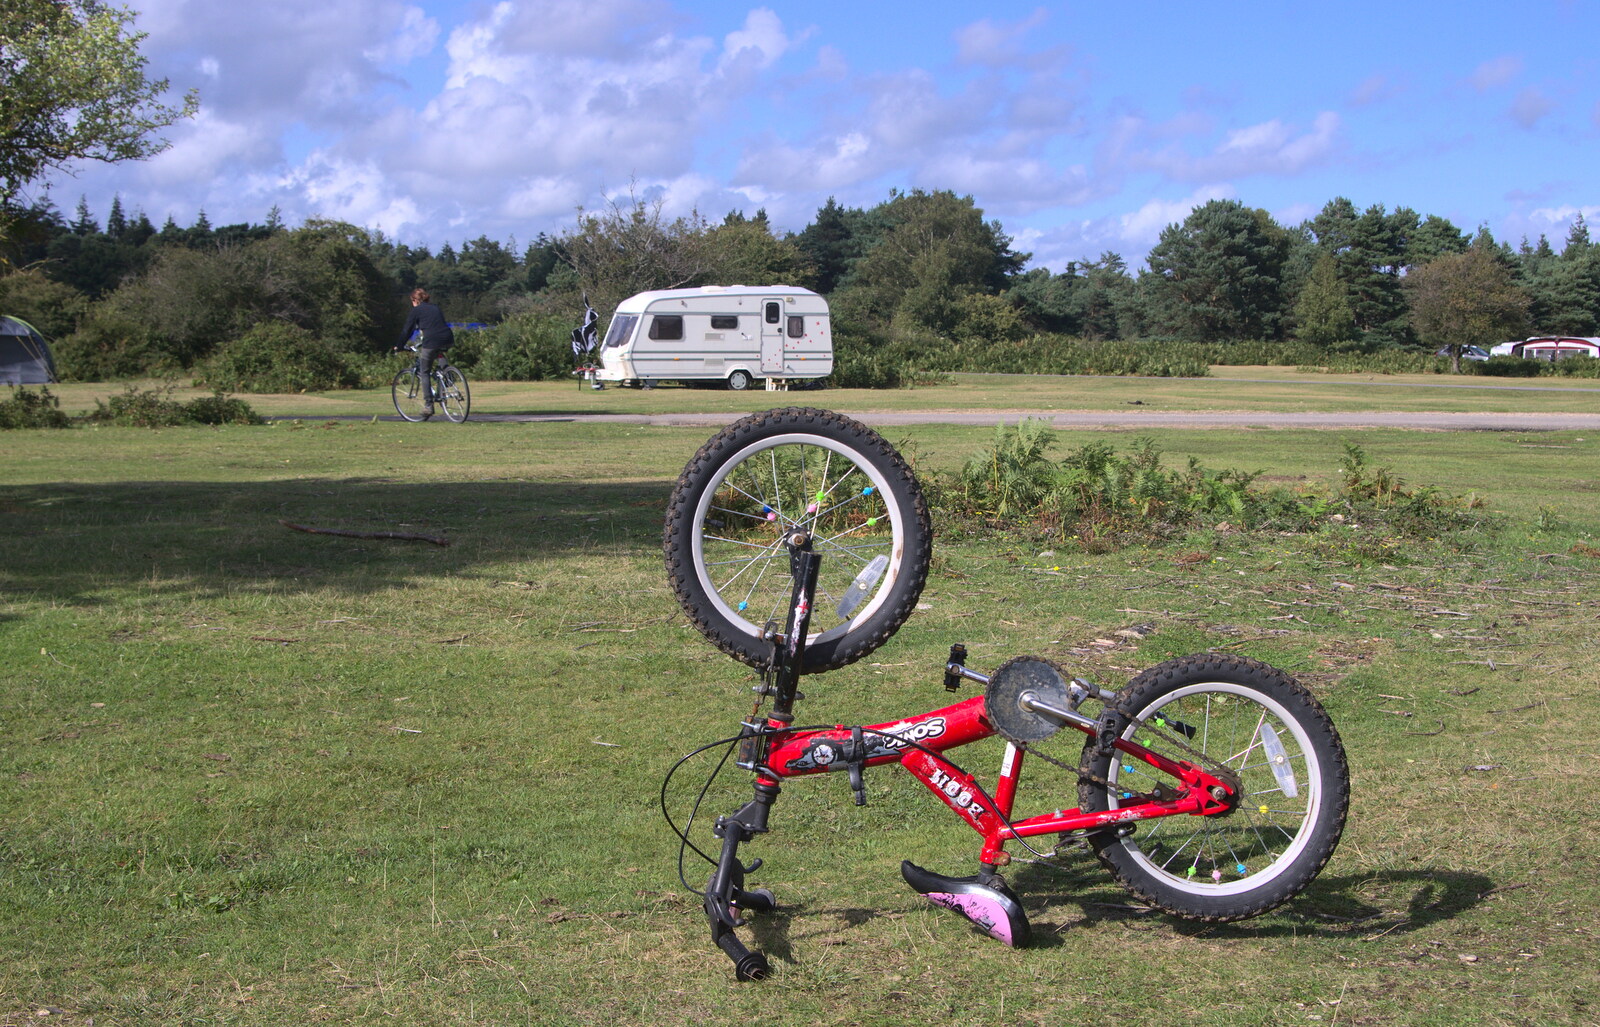 Fred's abandoned bike from Camping at Roundhills, Brockenhurst, New Forest, Hampshire - 29th August 2015